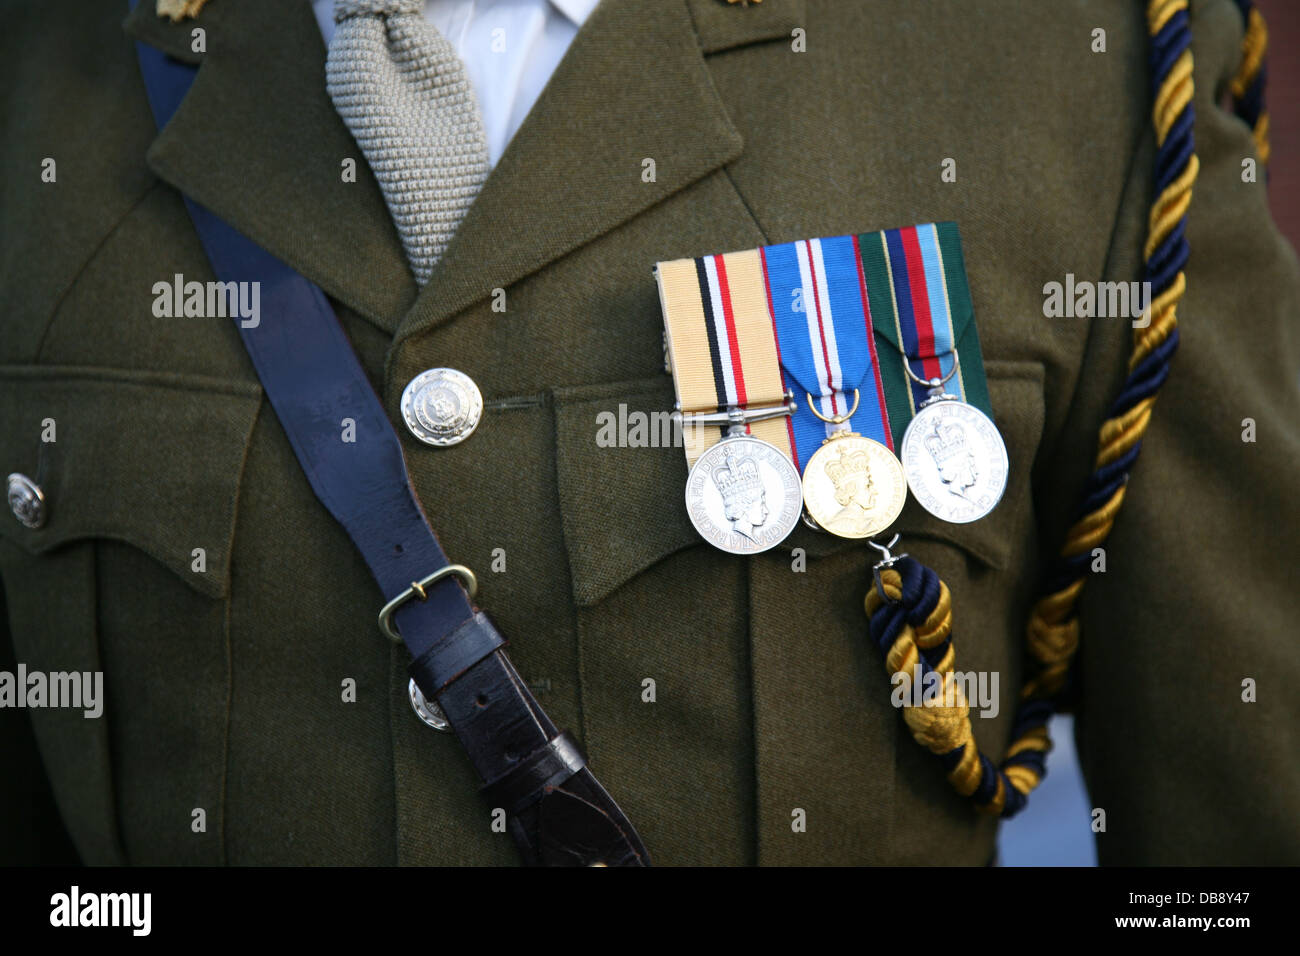 soldiers medals on the front of his uniform Stock Photo